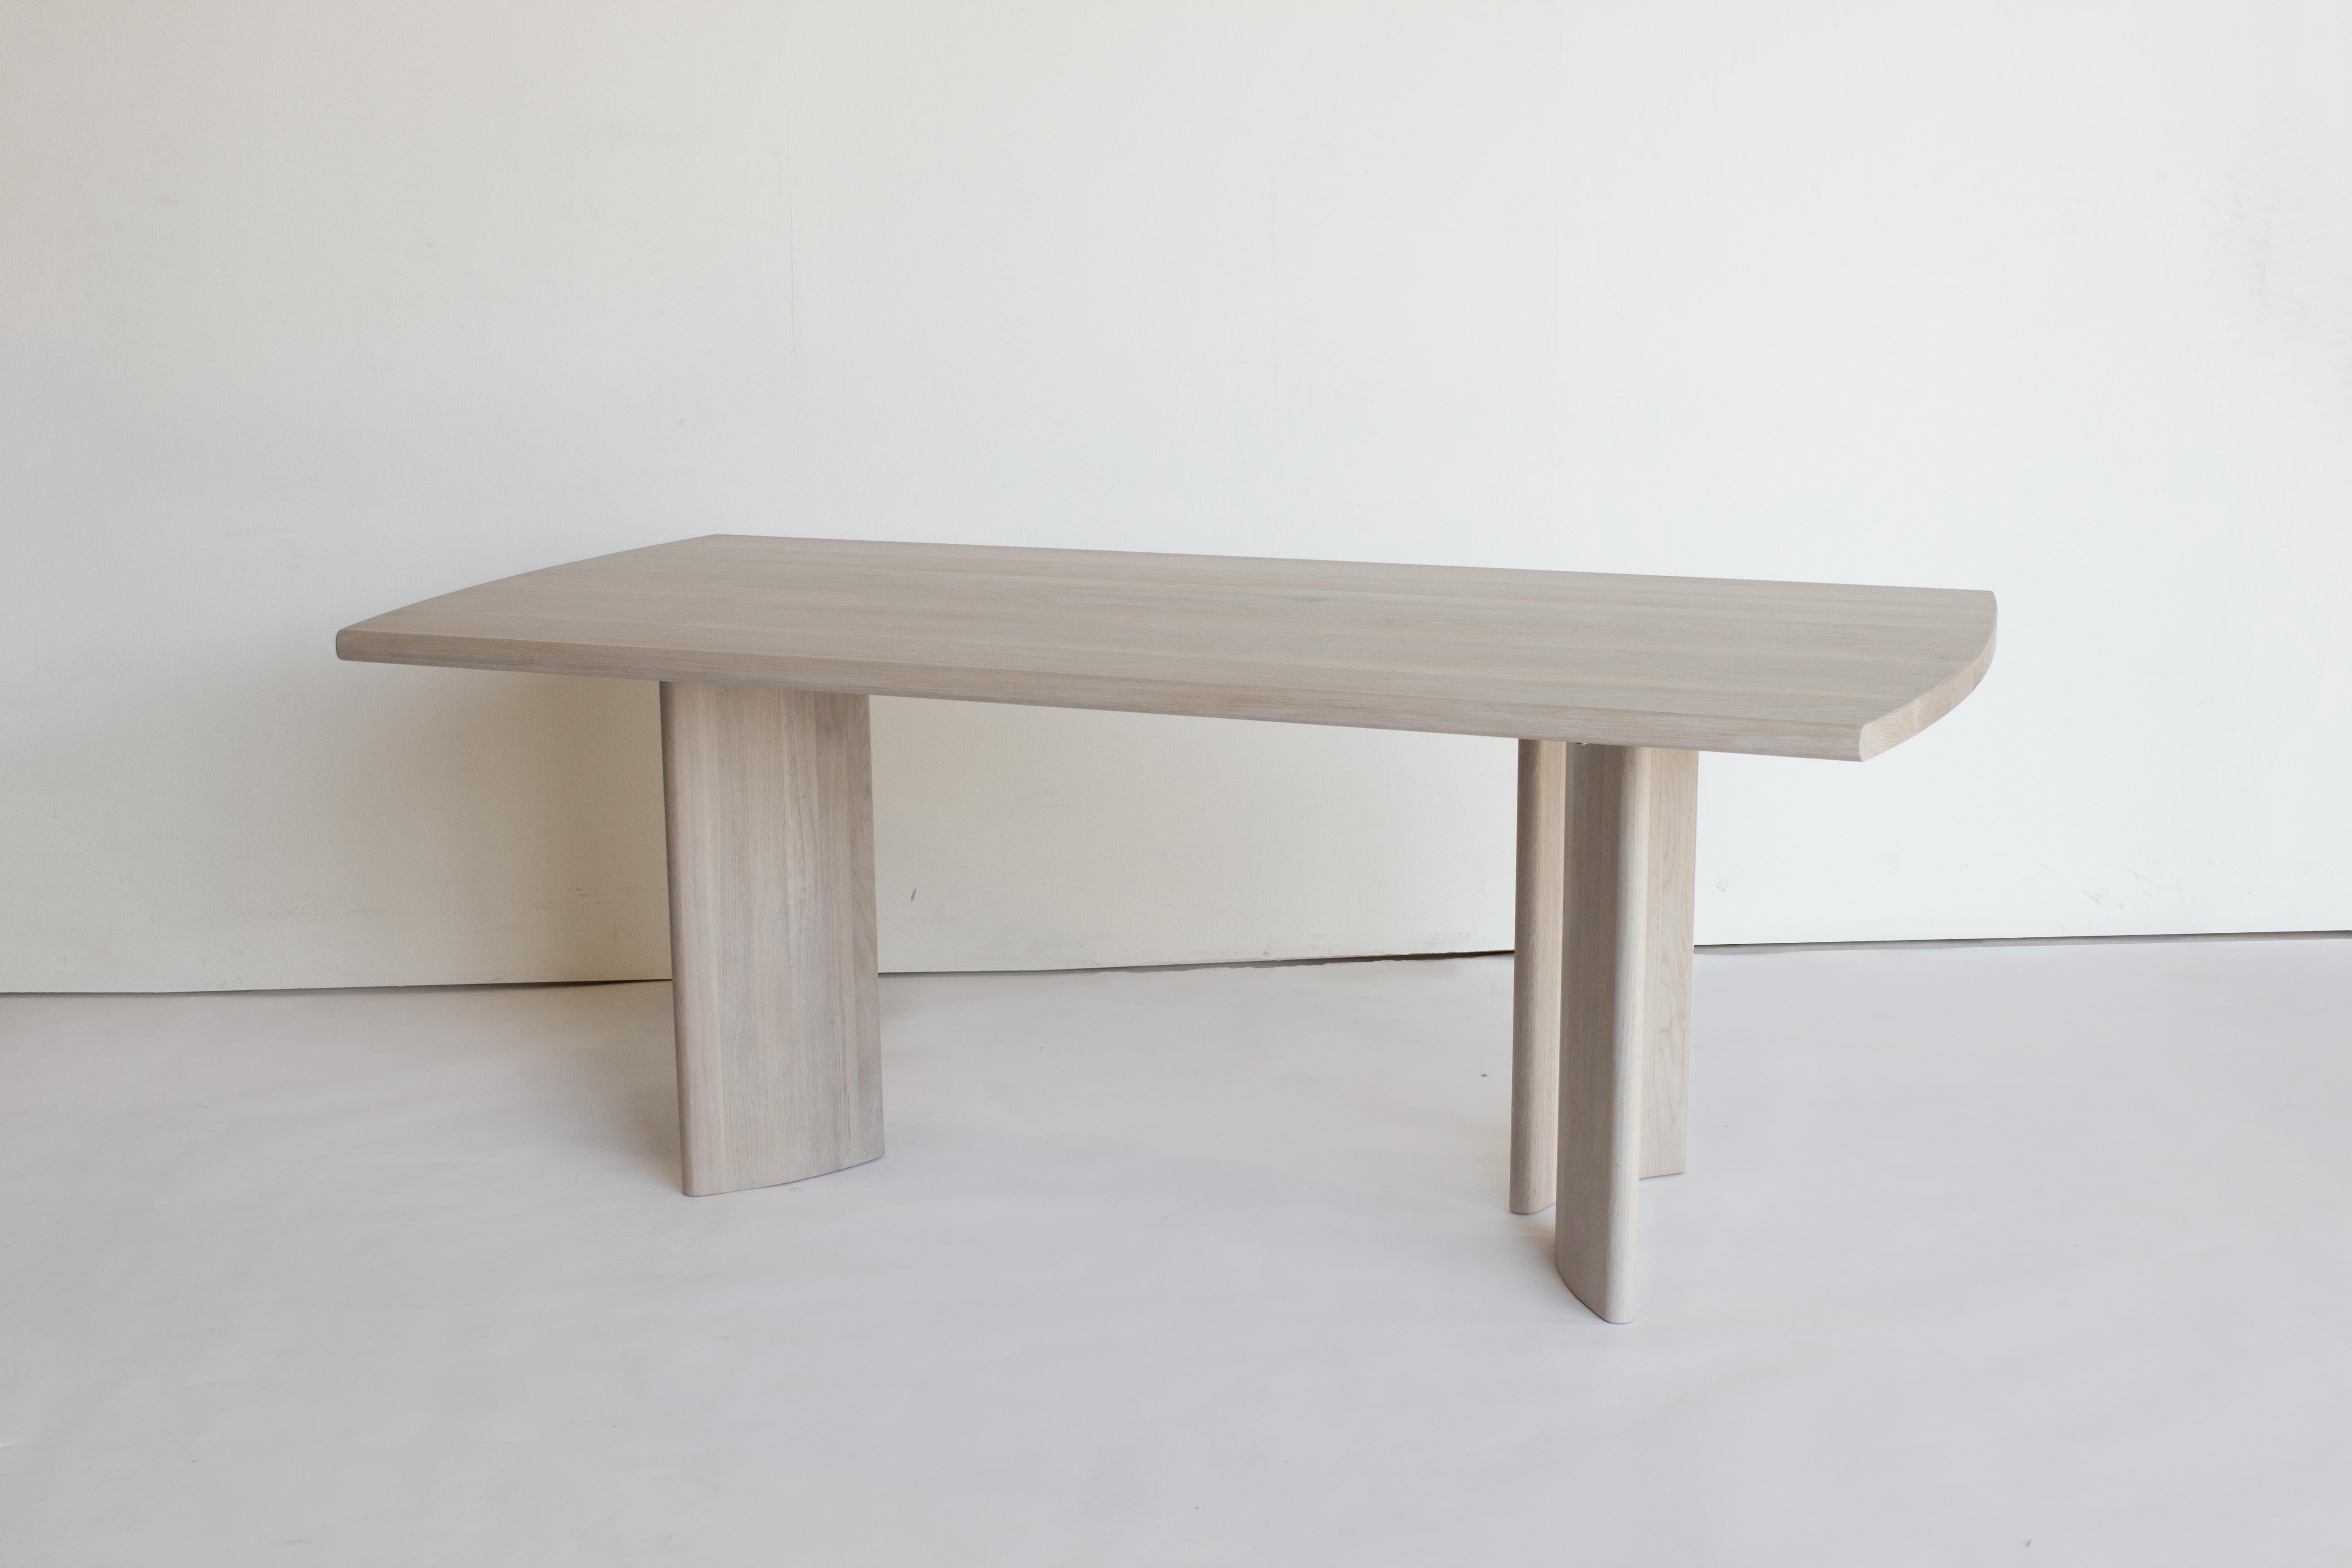 Chinese Crest Table by Sun at Six, Nude, Minimalist Dining Table in Wood